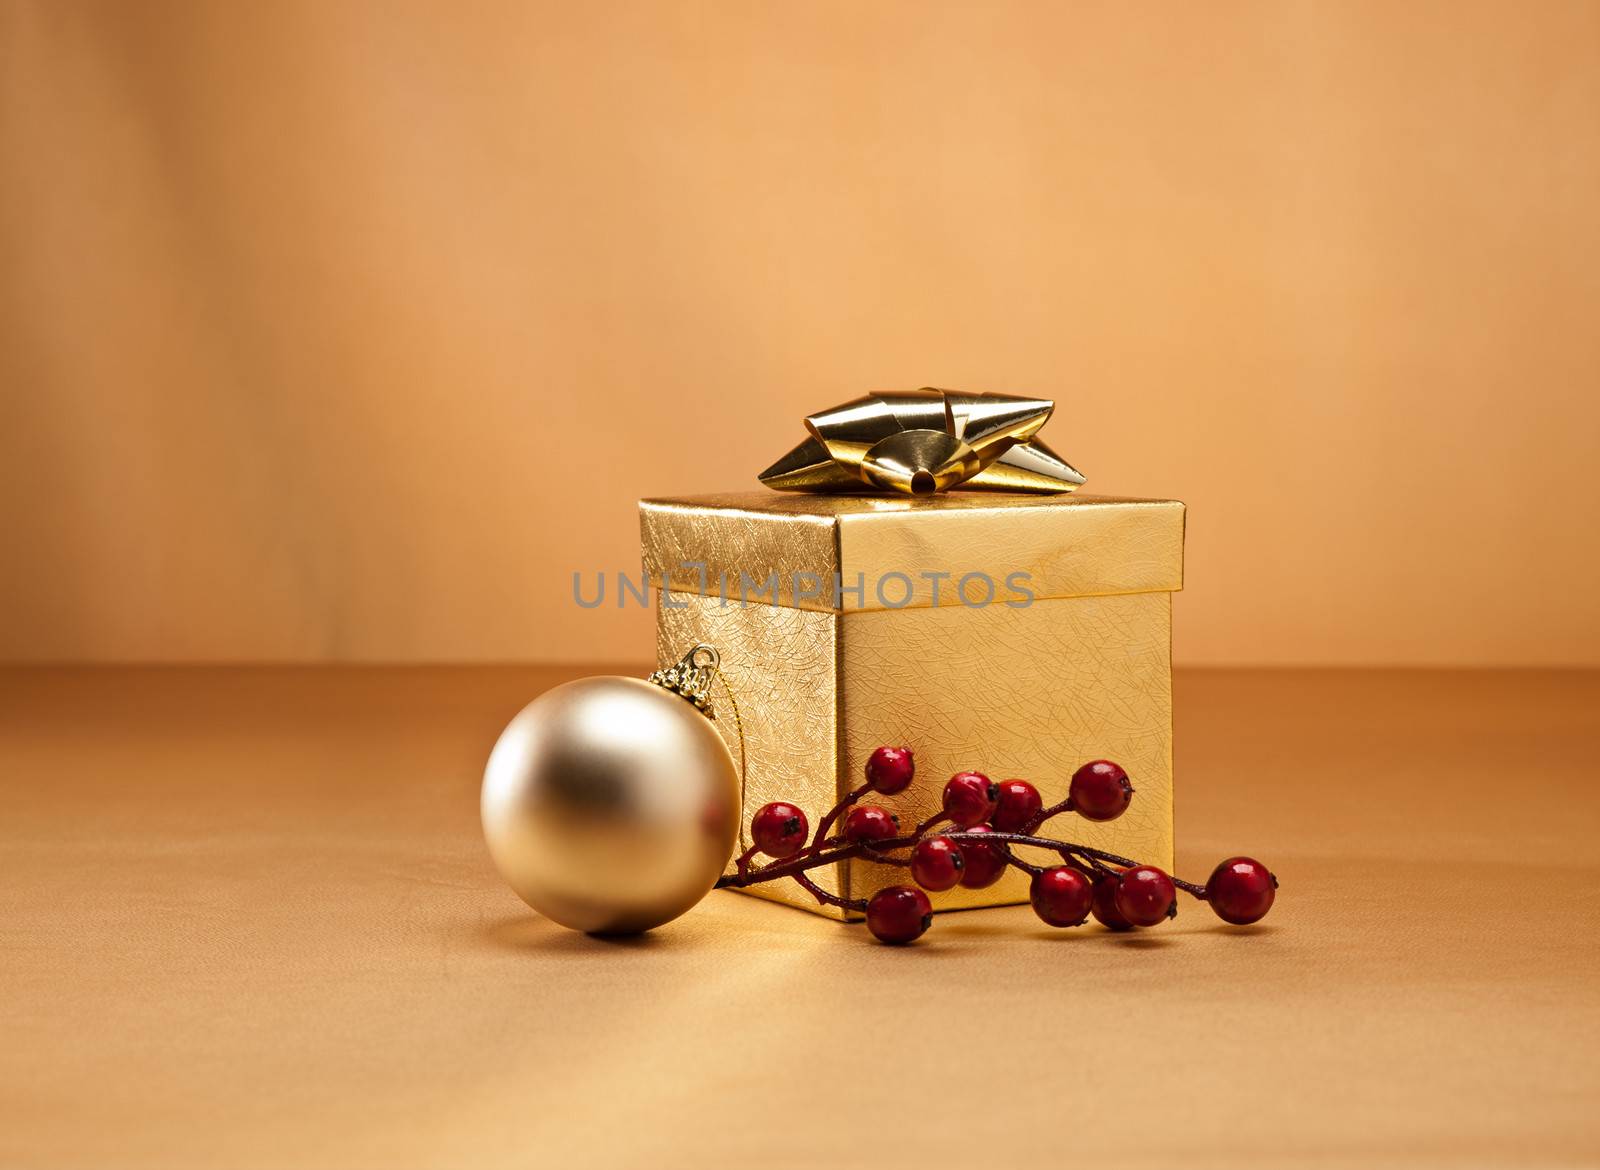 Gold present in Christmas setting for many events